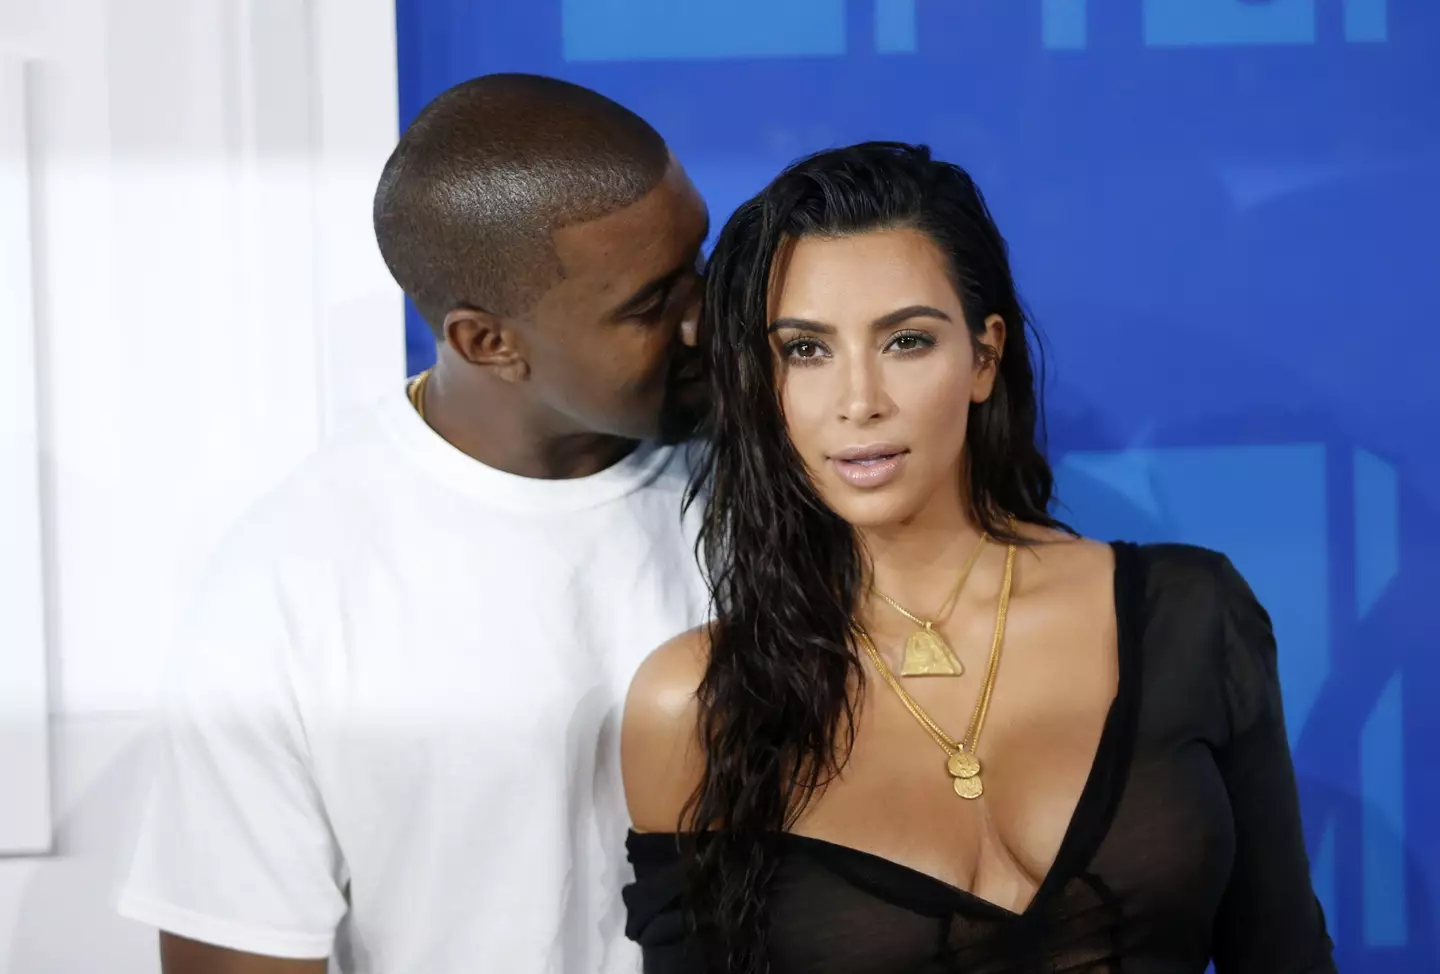 Kanye and Kim are now separated.